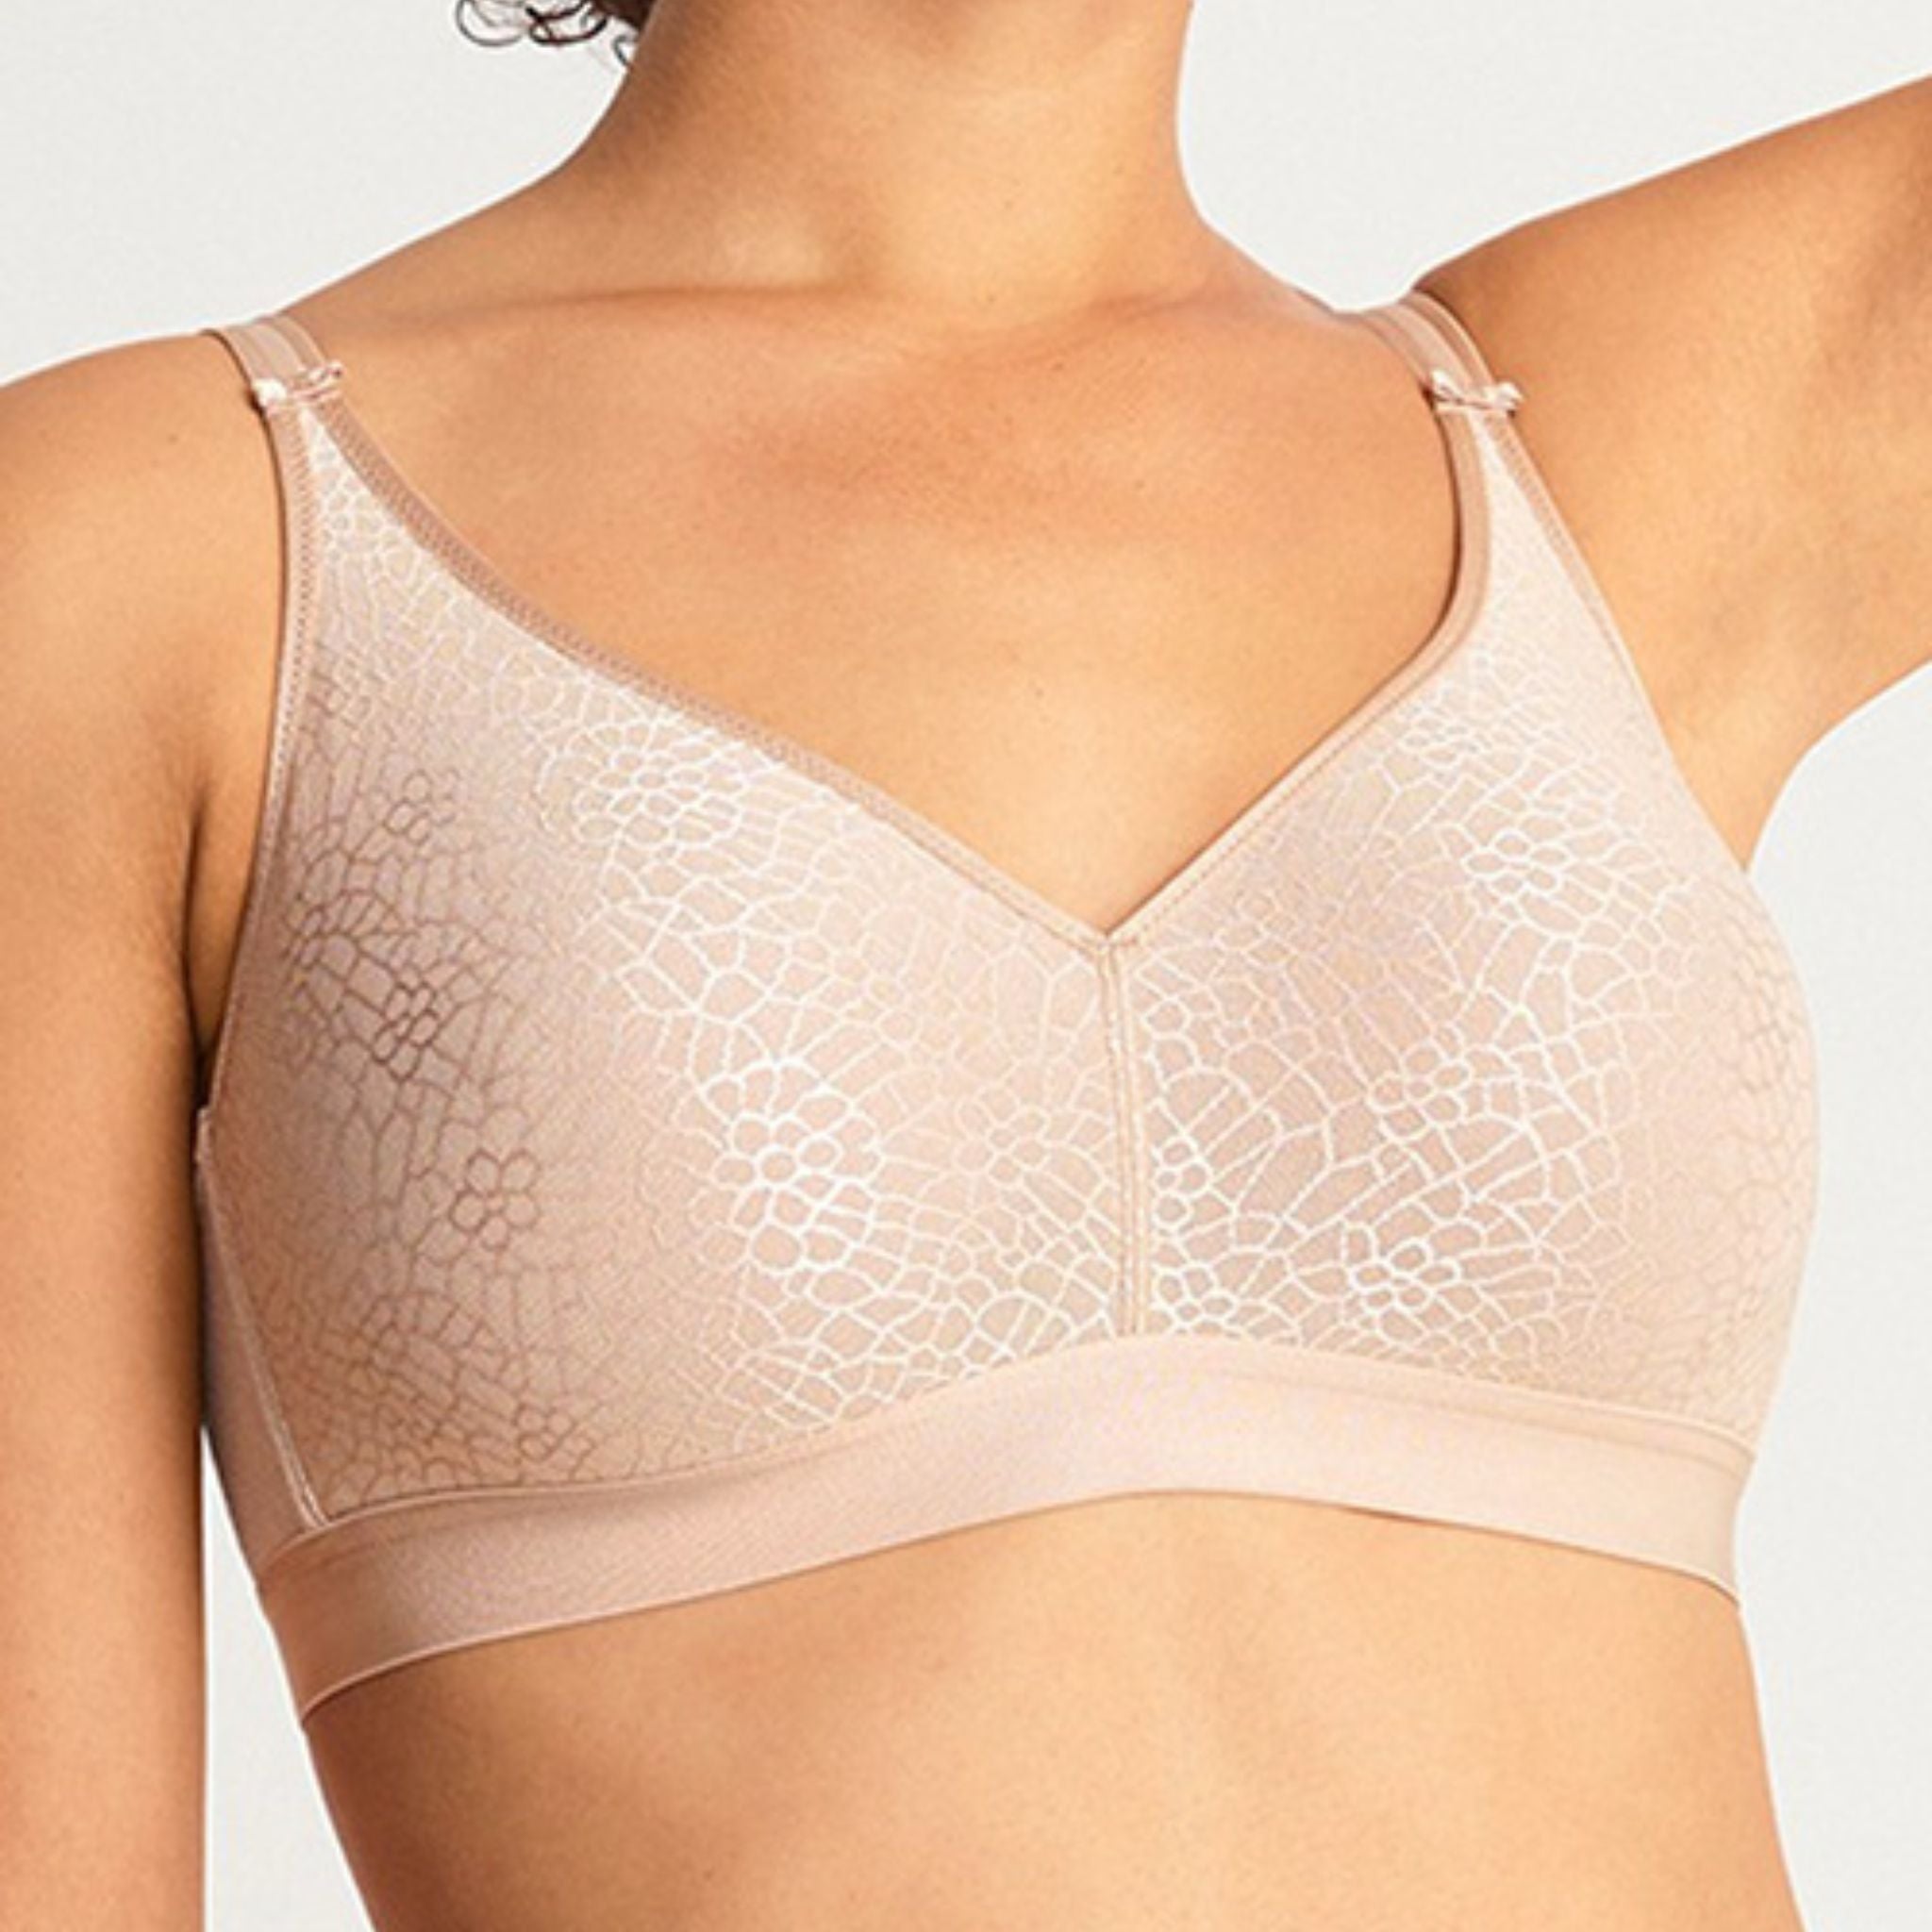 Chantelle's favorite seamless minimizer now in wireless form. This bralette comfortably lifts busts with the famous floral pattern showcasing a matte/shine contrast and minimizing qualities.